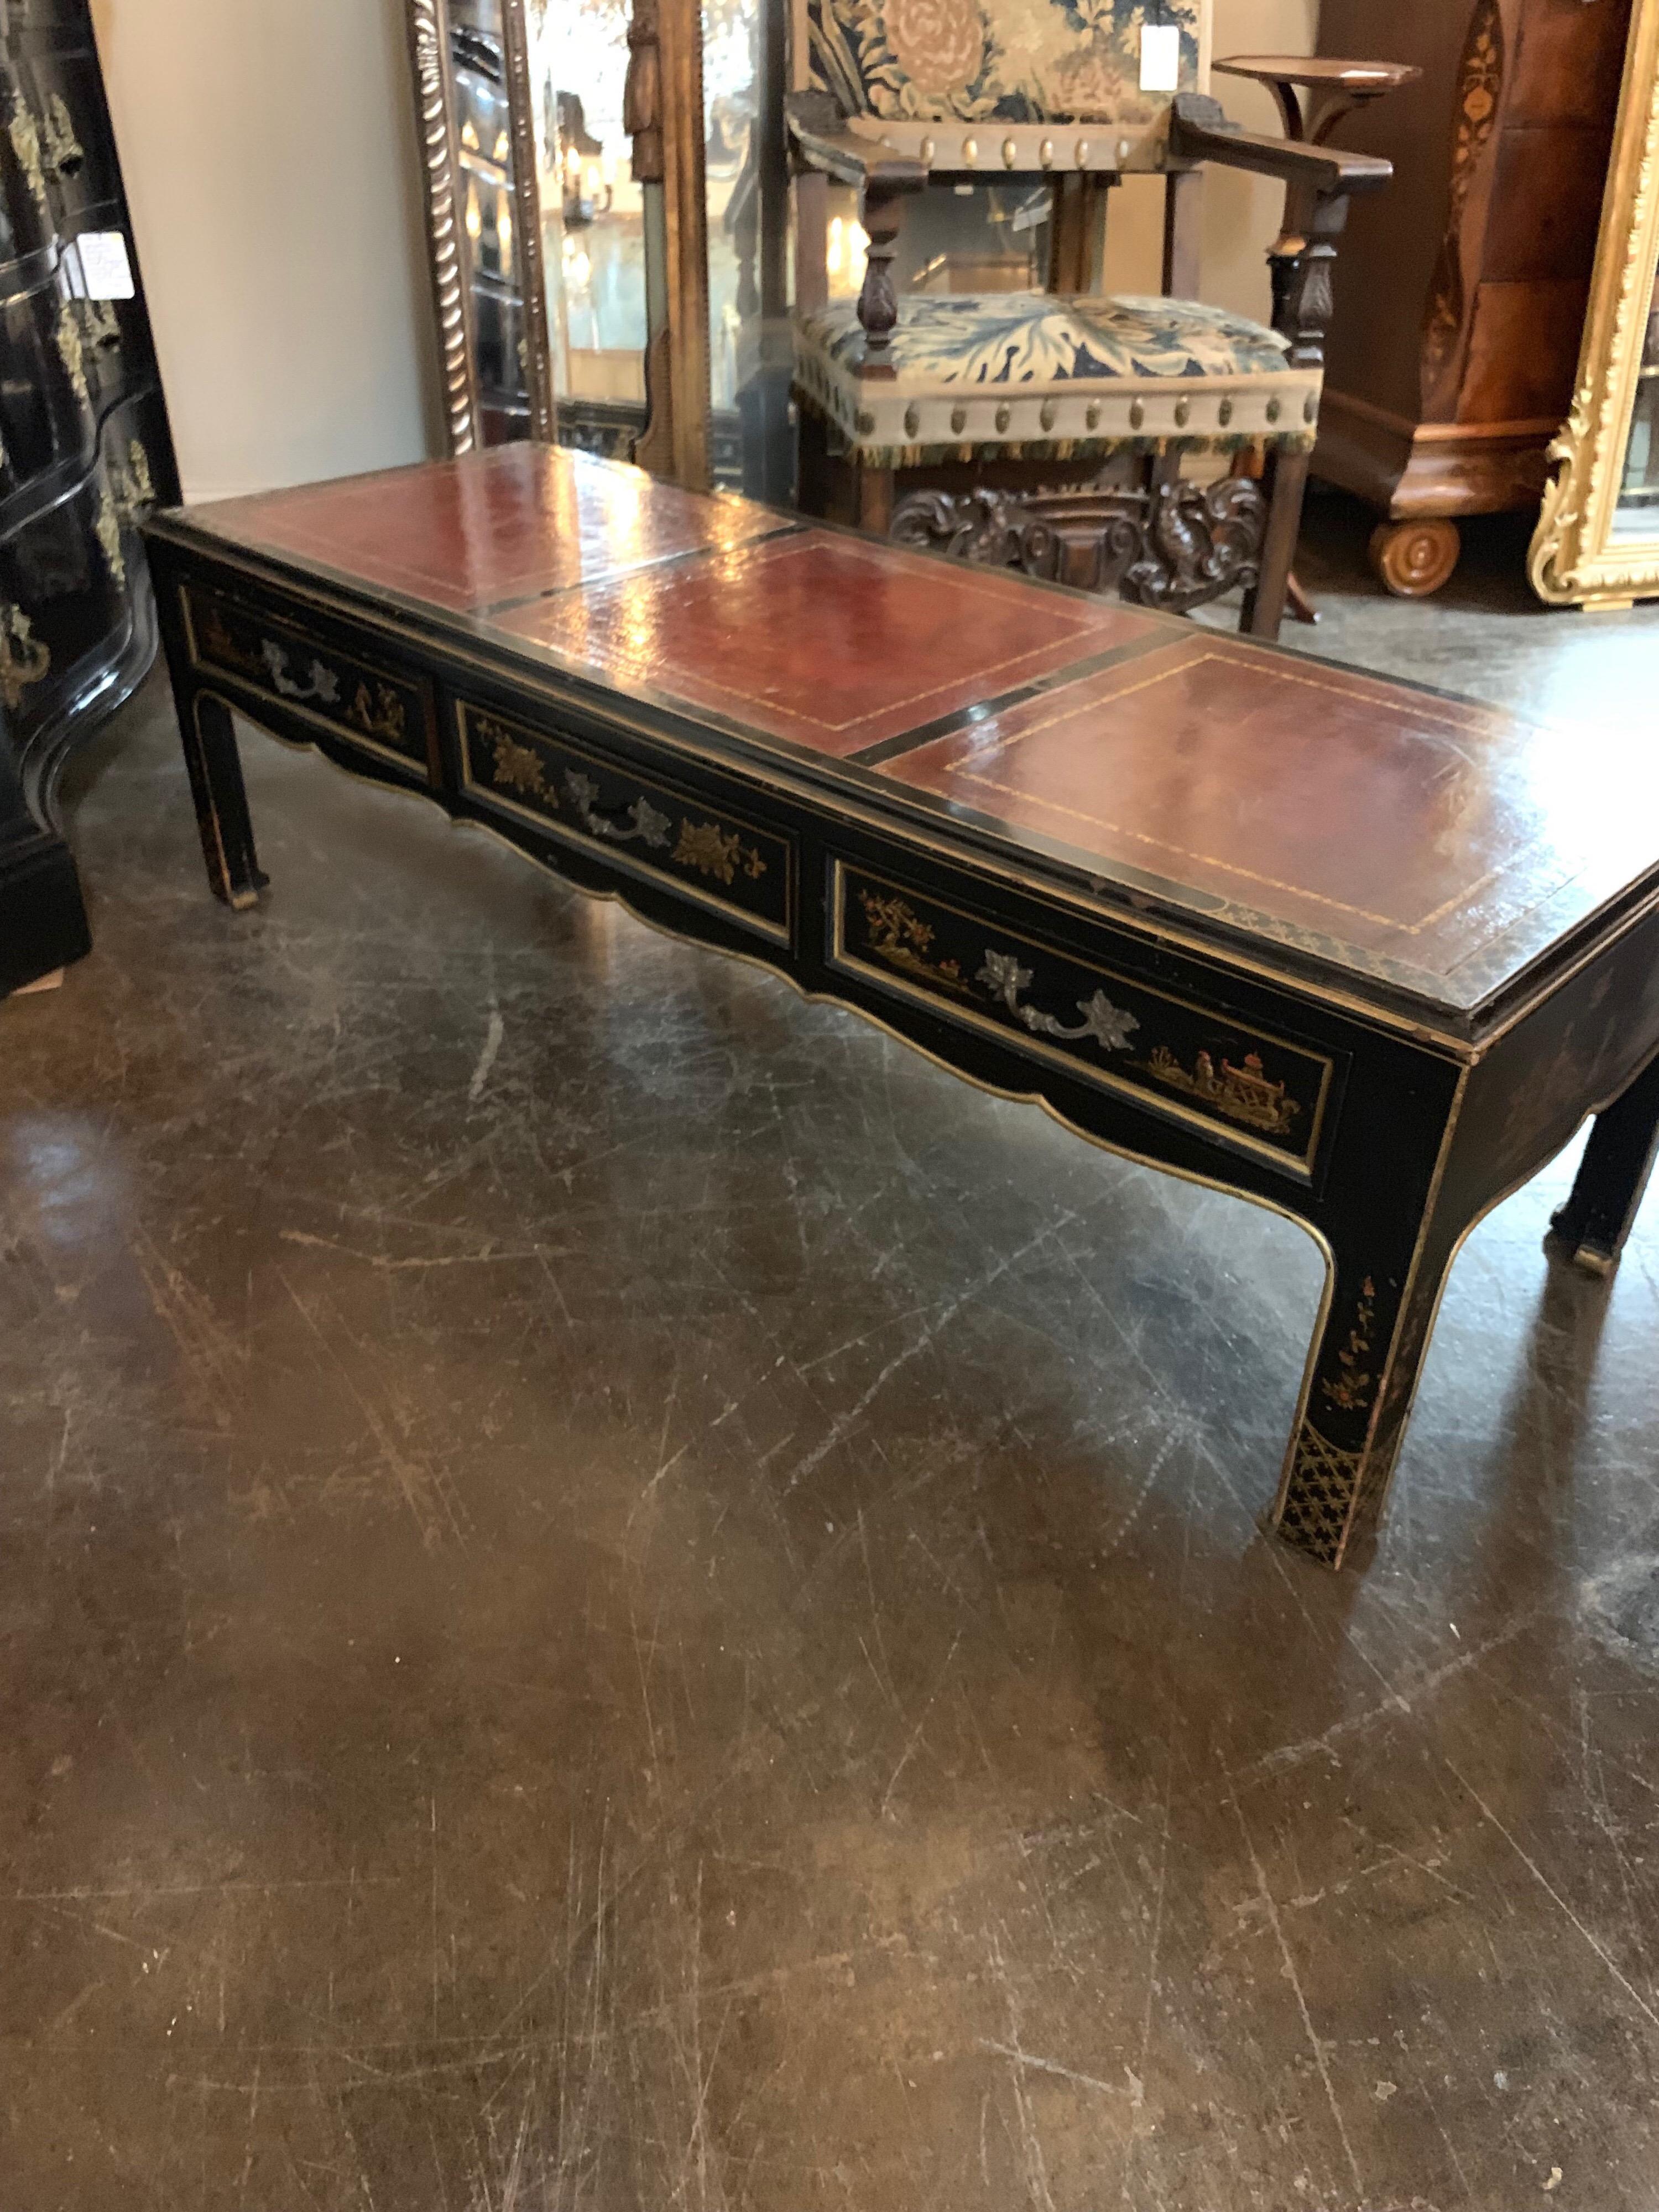 Beautiful and interesting 20th century English low table painted with a raised Chinoiserie design. Nice inlaid leather top as well a great conversation piece!